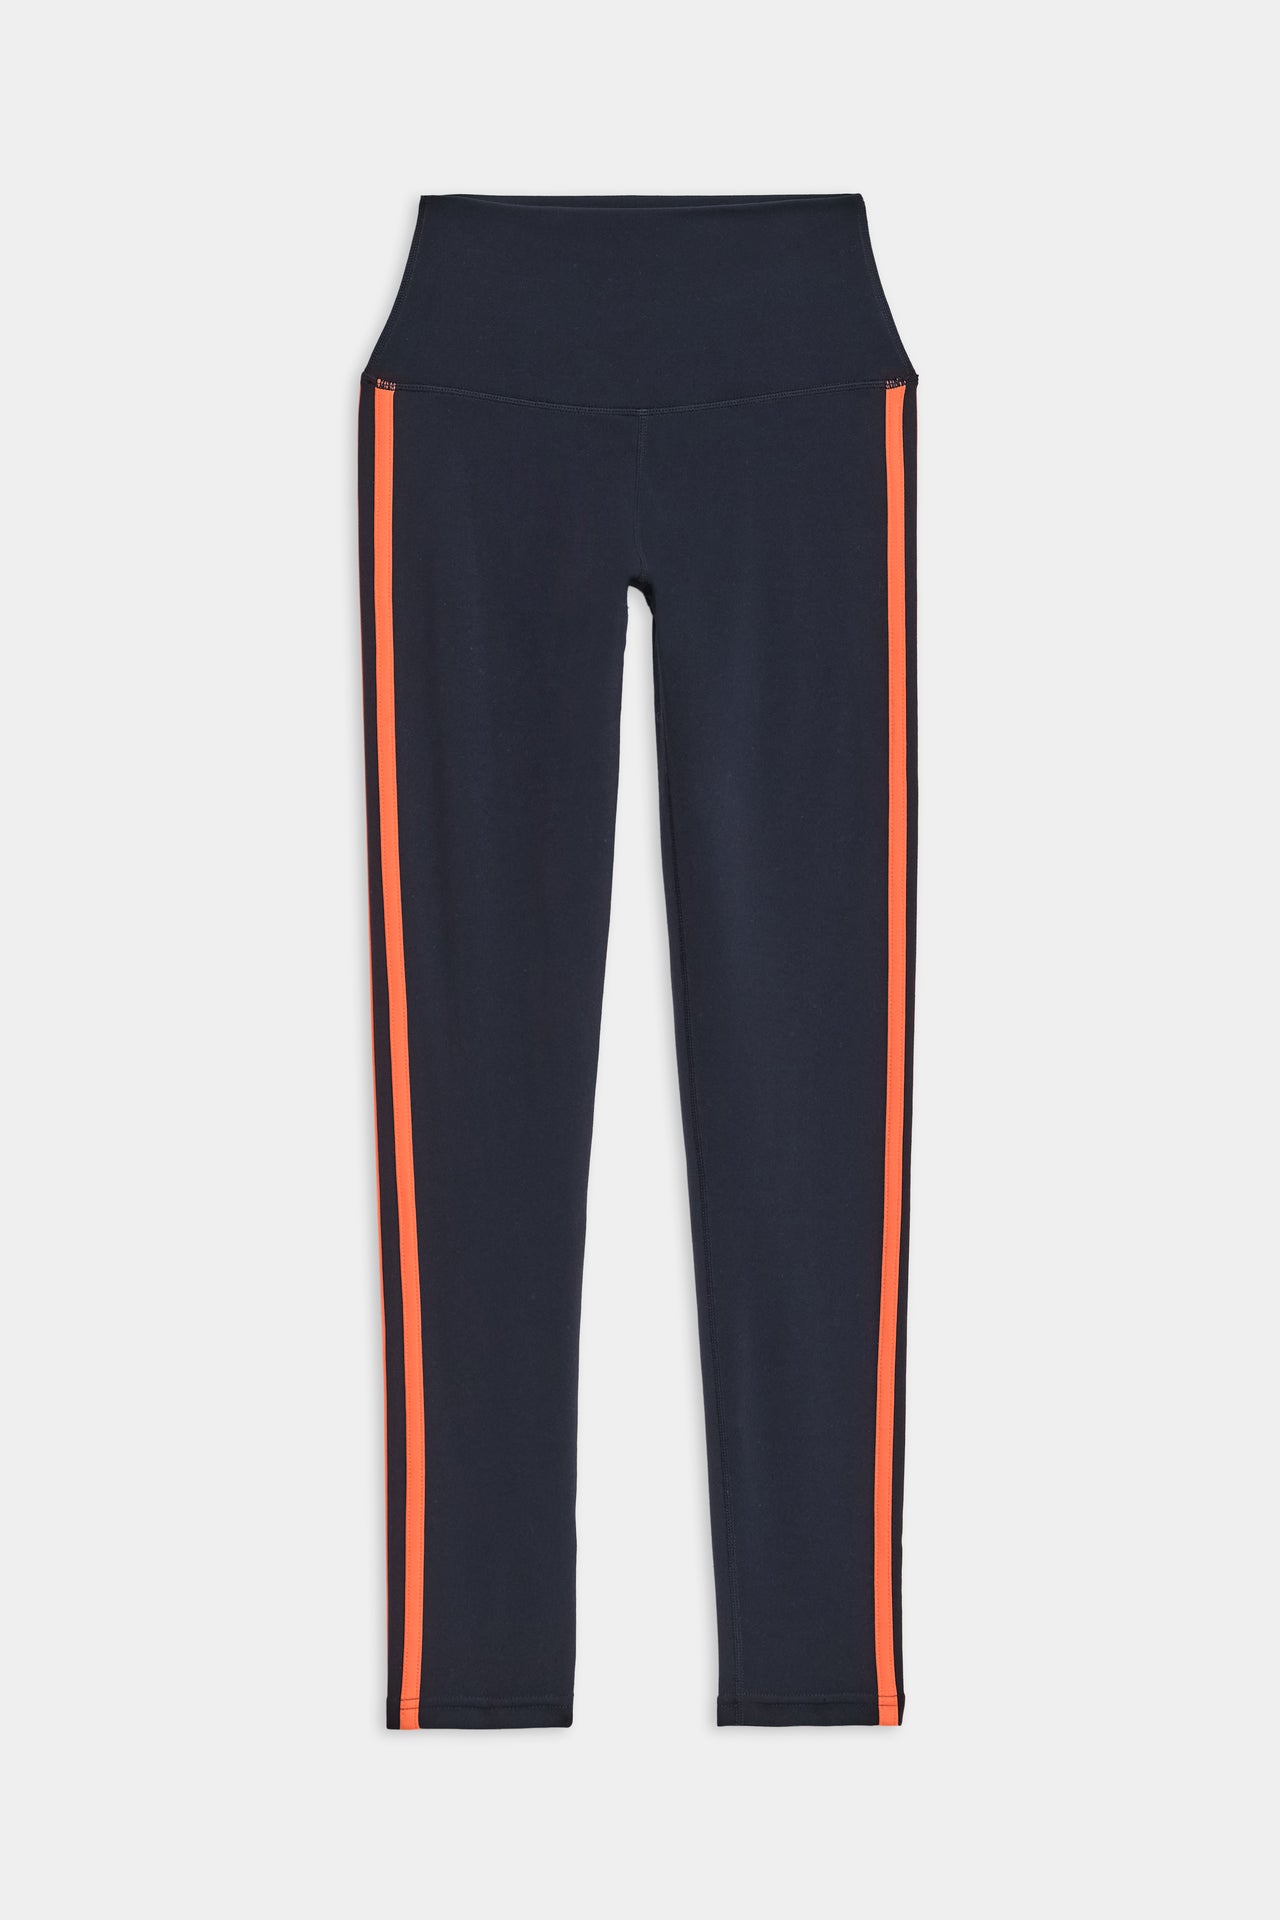 Flat view of dark blue leggings with two red stripes down the side